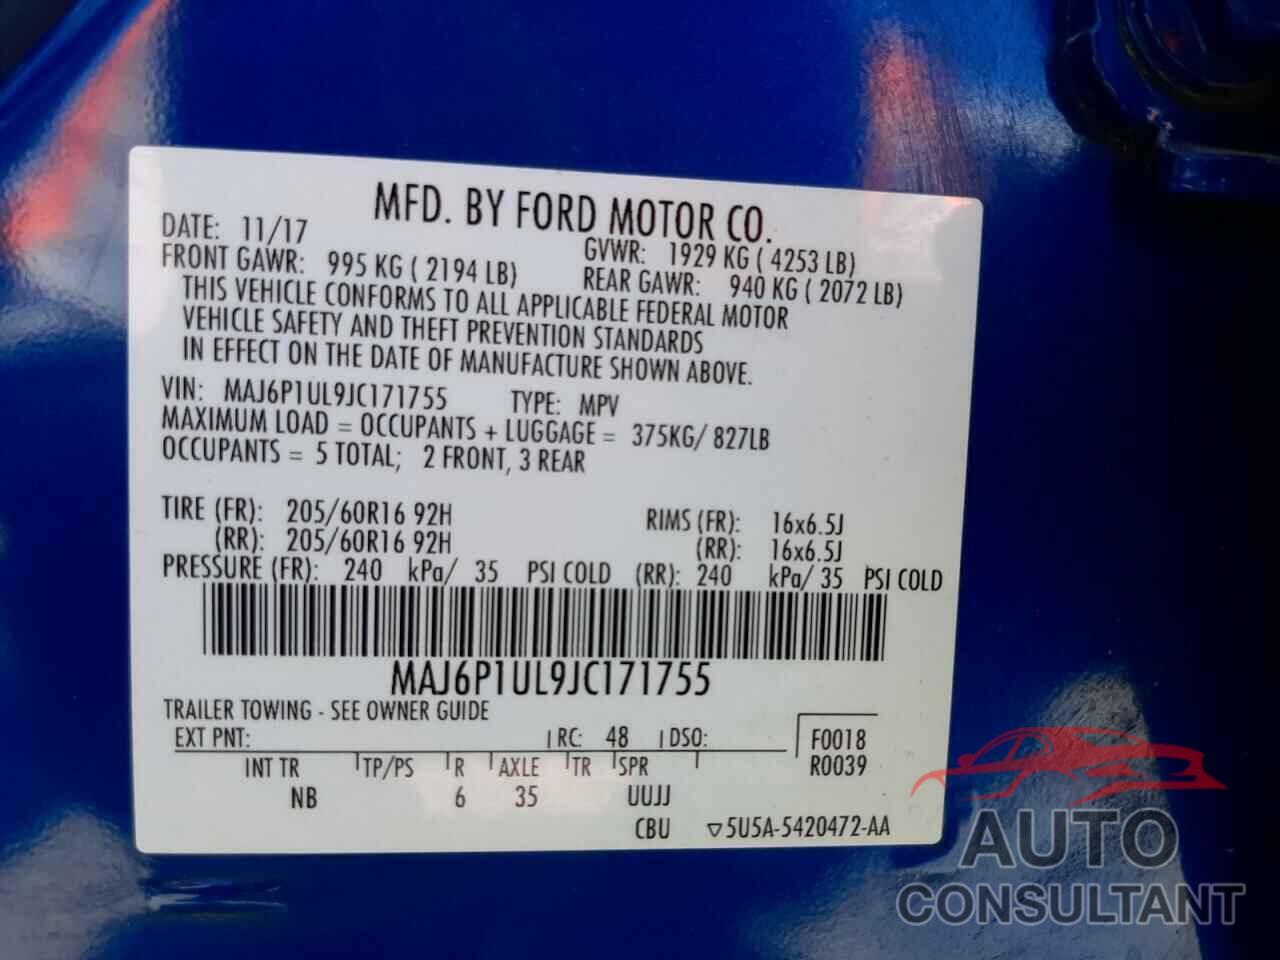 FORD ALL OTHER 2018 - MAJ6P1UL9JC171755